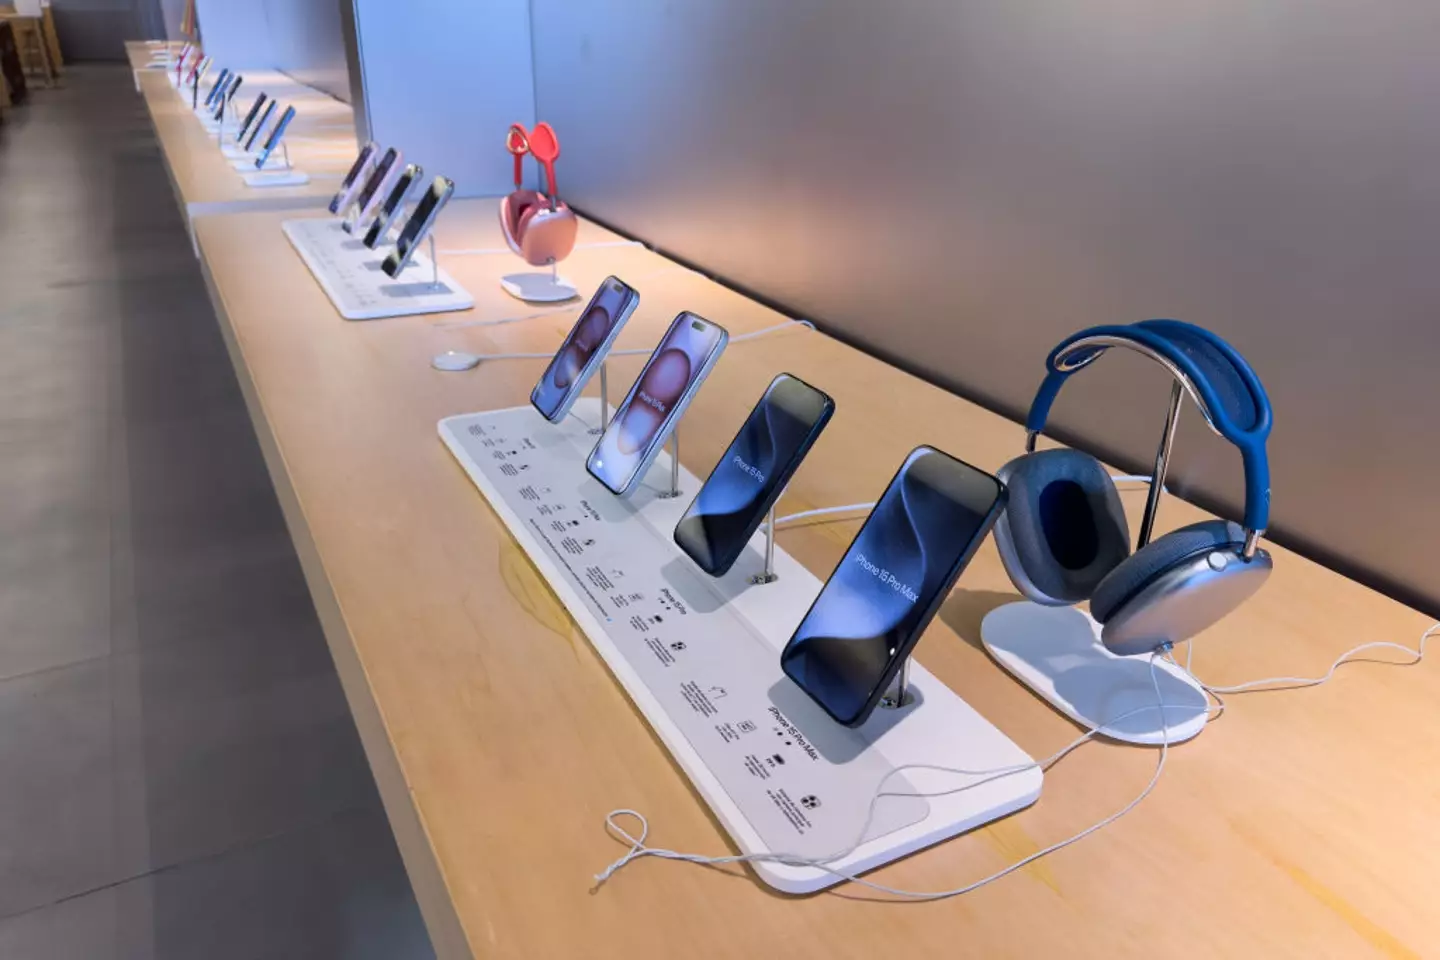 Have you ever been in the Apple store and wanted everything?